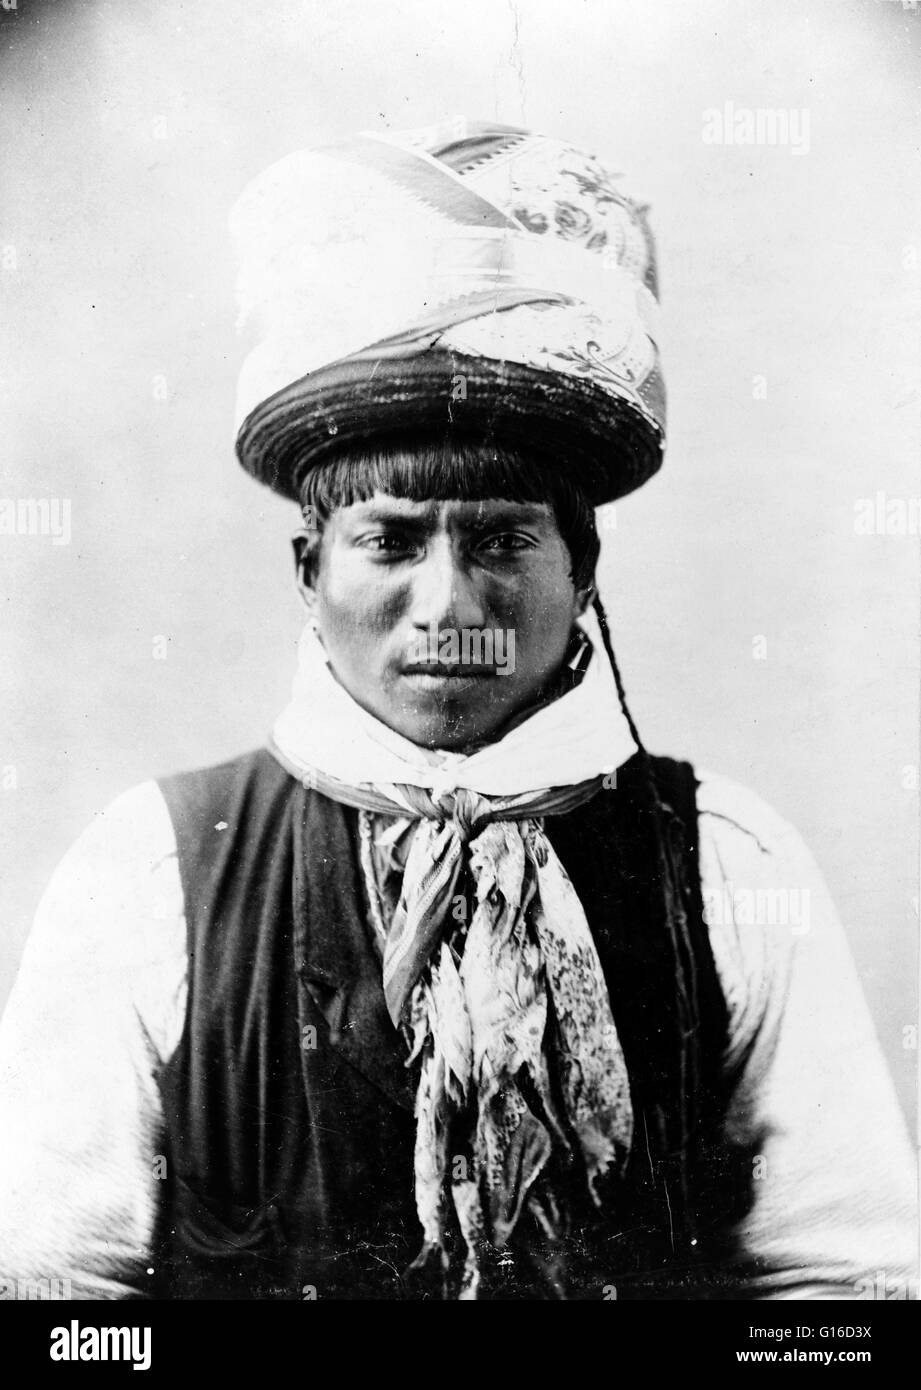 Seminole brave 'Billy Bowlegs' photographed by Arthur P. Lewis, 1895. Chief Billy Bowlegs was a leader of the Seminoles in Florida during the Second and Third Seminole Wars against the United States. He was born into a family of hereditary chiefs descende Stock Photo